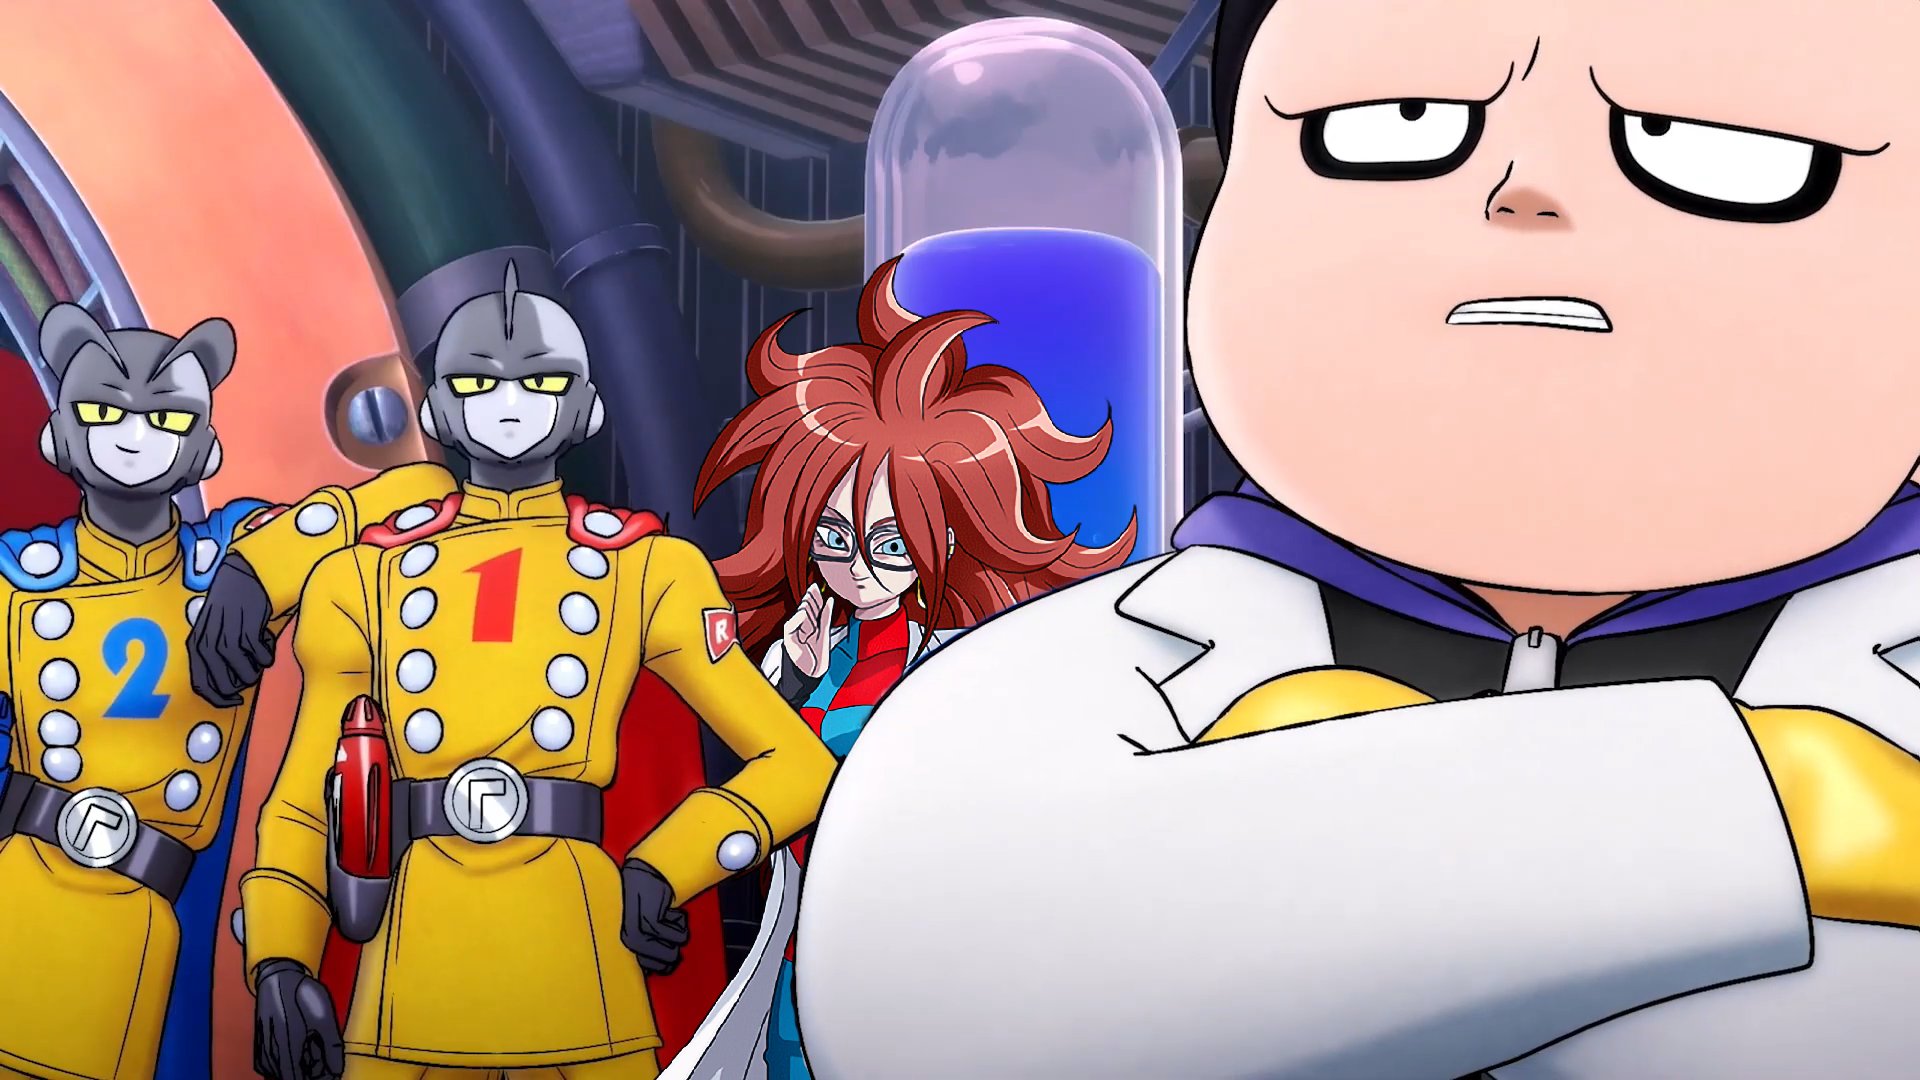 Carthu on X: Android 21 CONFIRMED for Dragon Ball Super: Super Hero!  Toriyama's Official Statement: 人造人間21号様、踏ん張ってください! Eng: I wanted to include  this character since designing her, please enjoy her on screen presence!